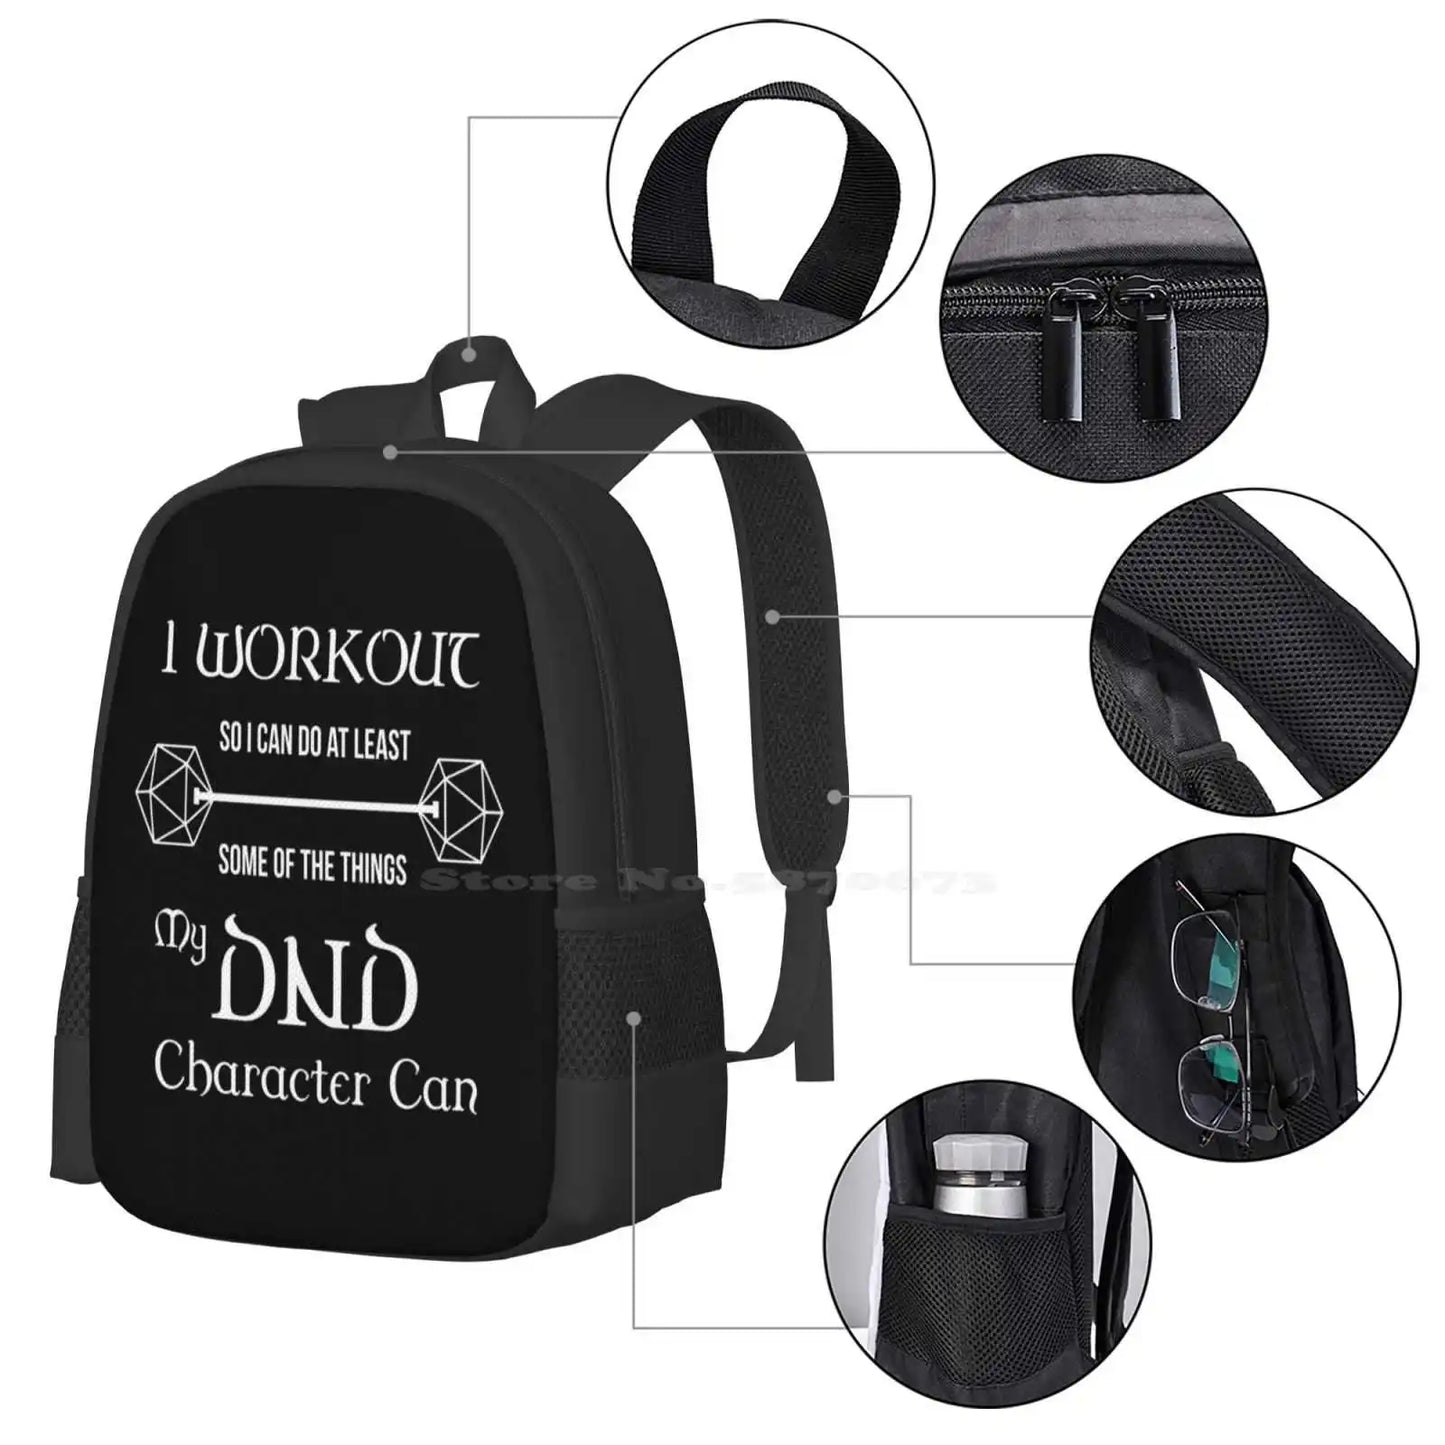 Dnd Character Workout - In White Backpack For Student School Laptop Travel Bag And Dragons Gym Workout Roleplaying Rpg Dnd D20